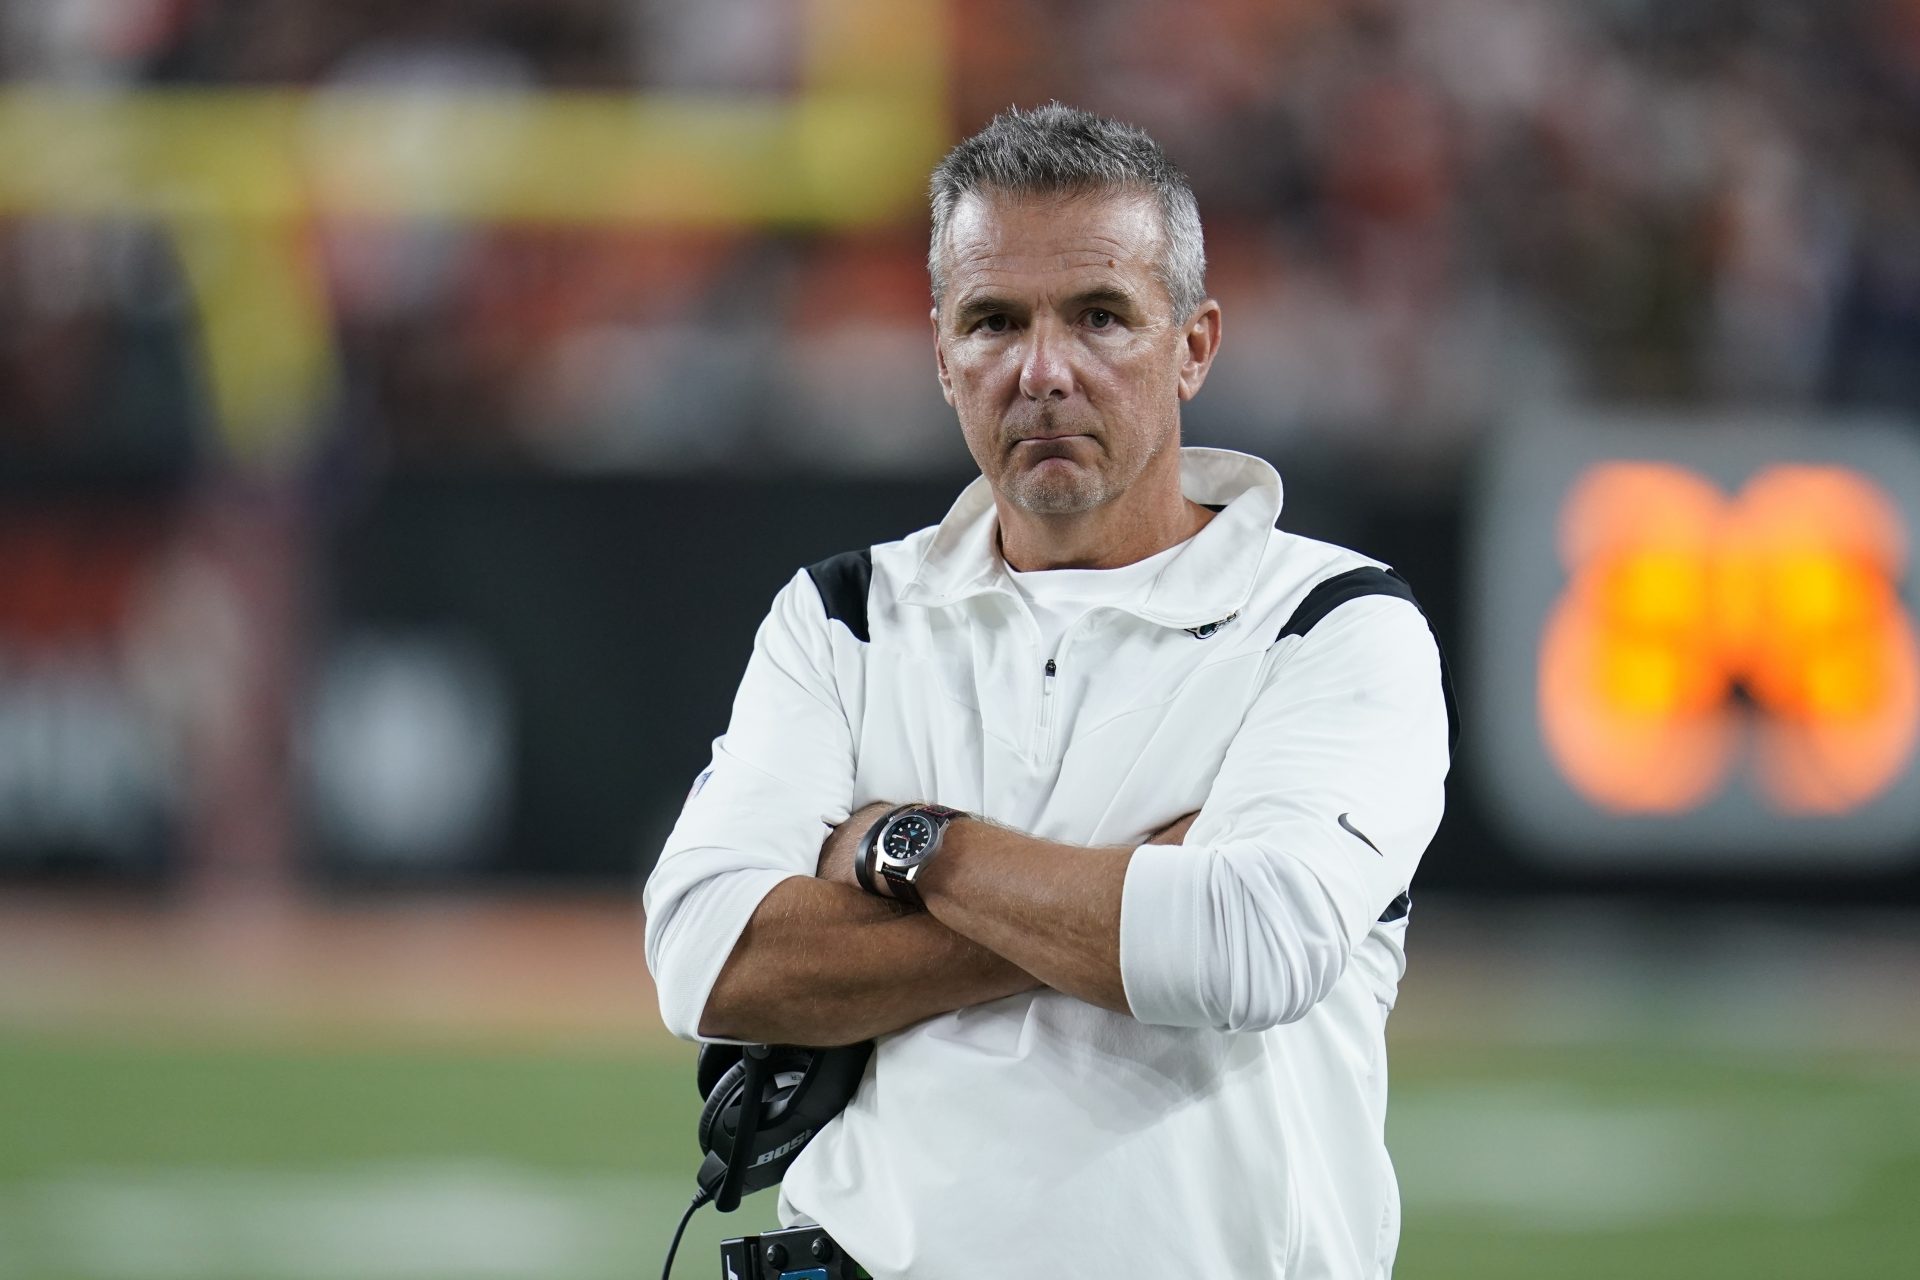 Urban Meyer: Jaguars’ Loss to Bengals Used to be ‘Devastating’ and ‘Heartbreaking’